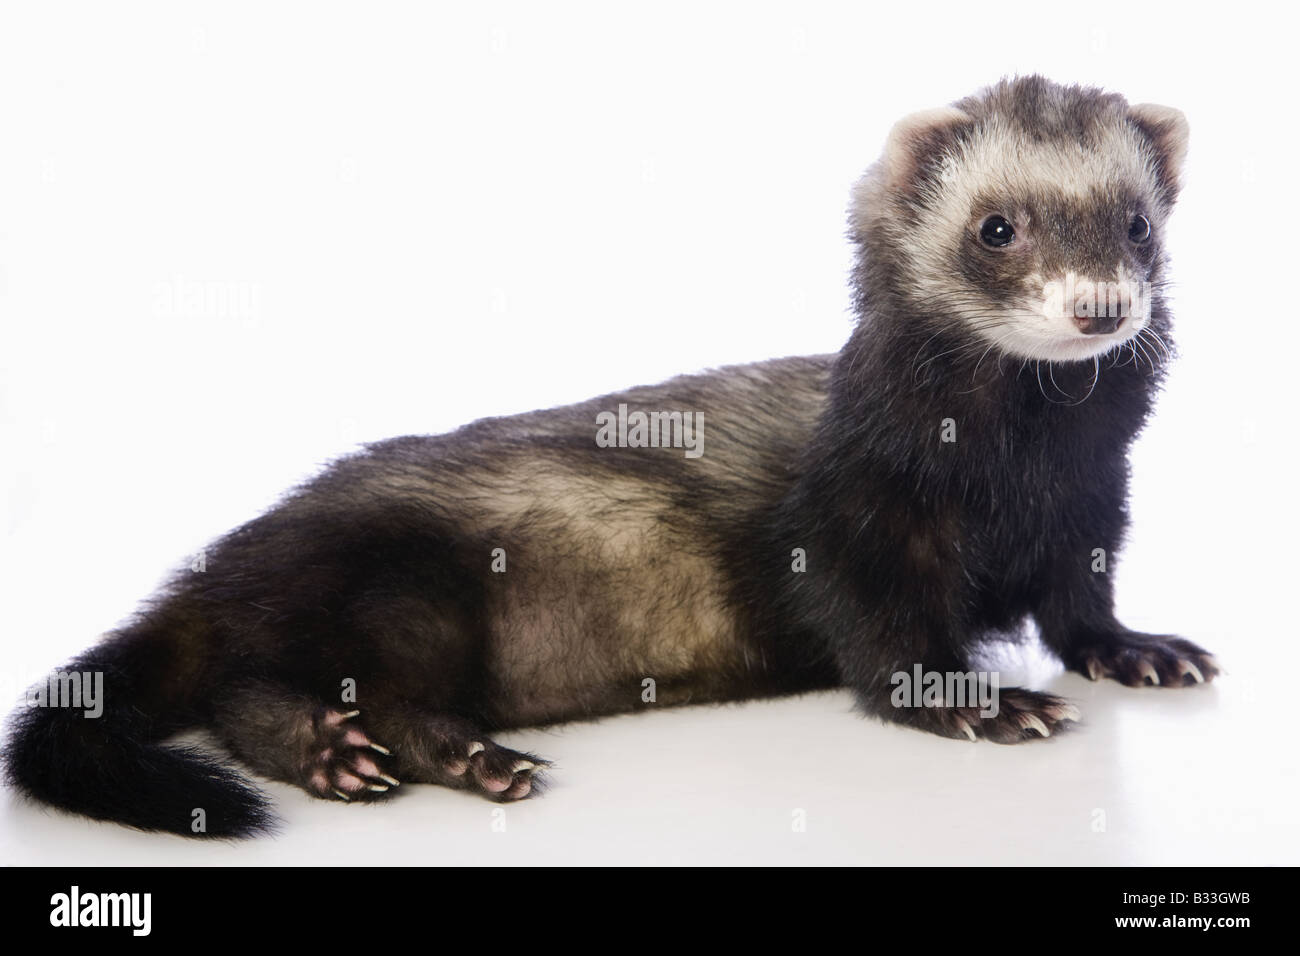 Cute Sable Ferret Lying Down Isolated On White Background Stock Photo Alamy